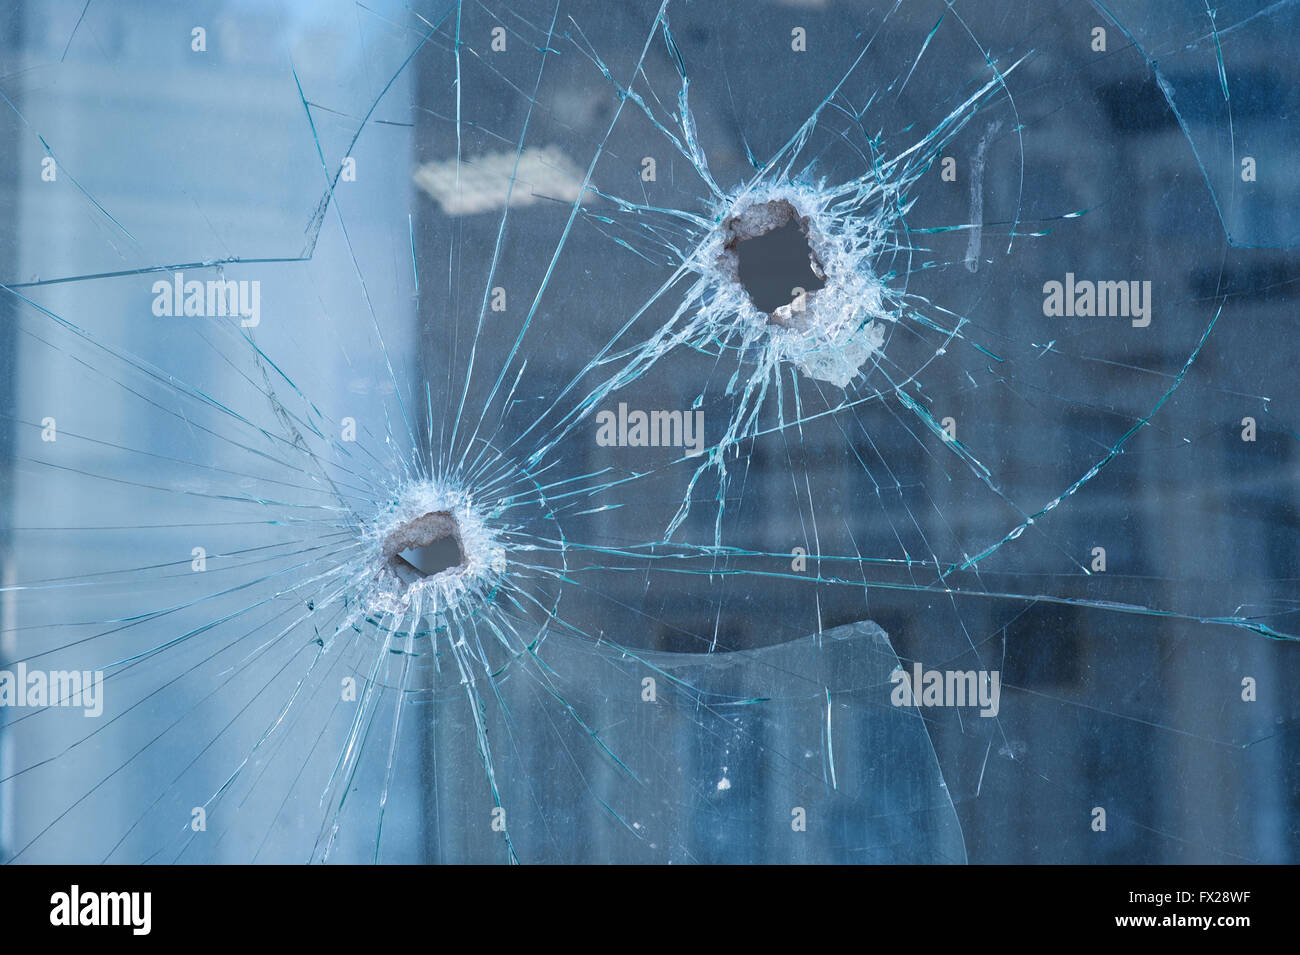 two bullet holes in the glass windows Stock Photo